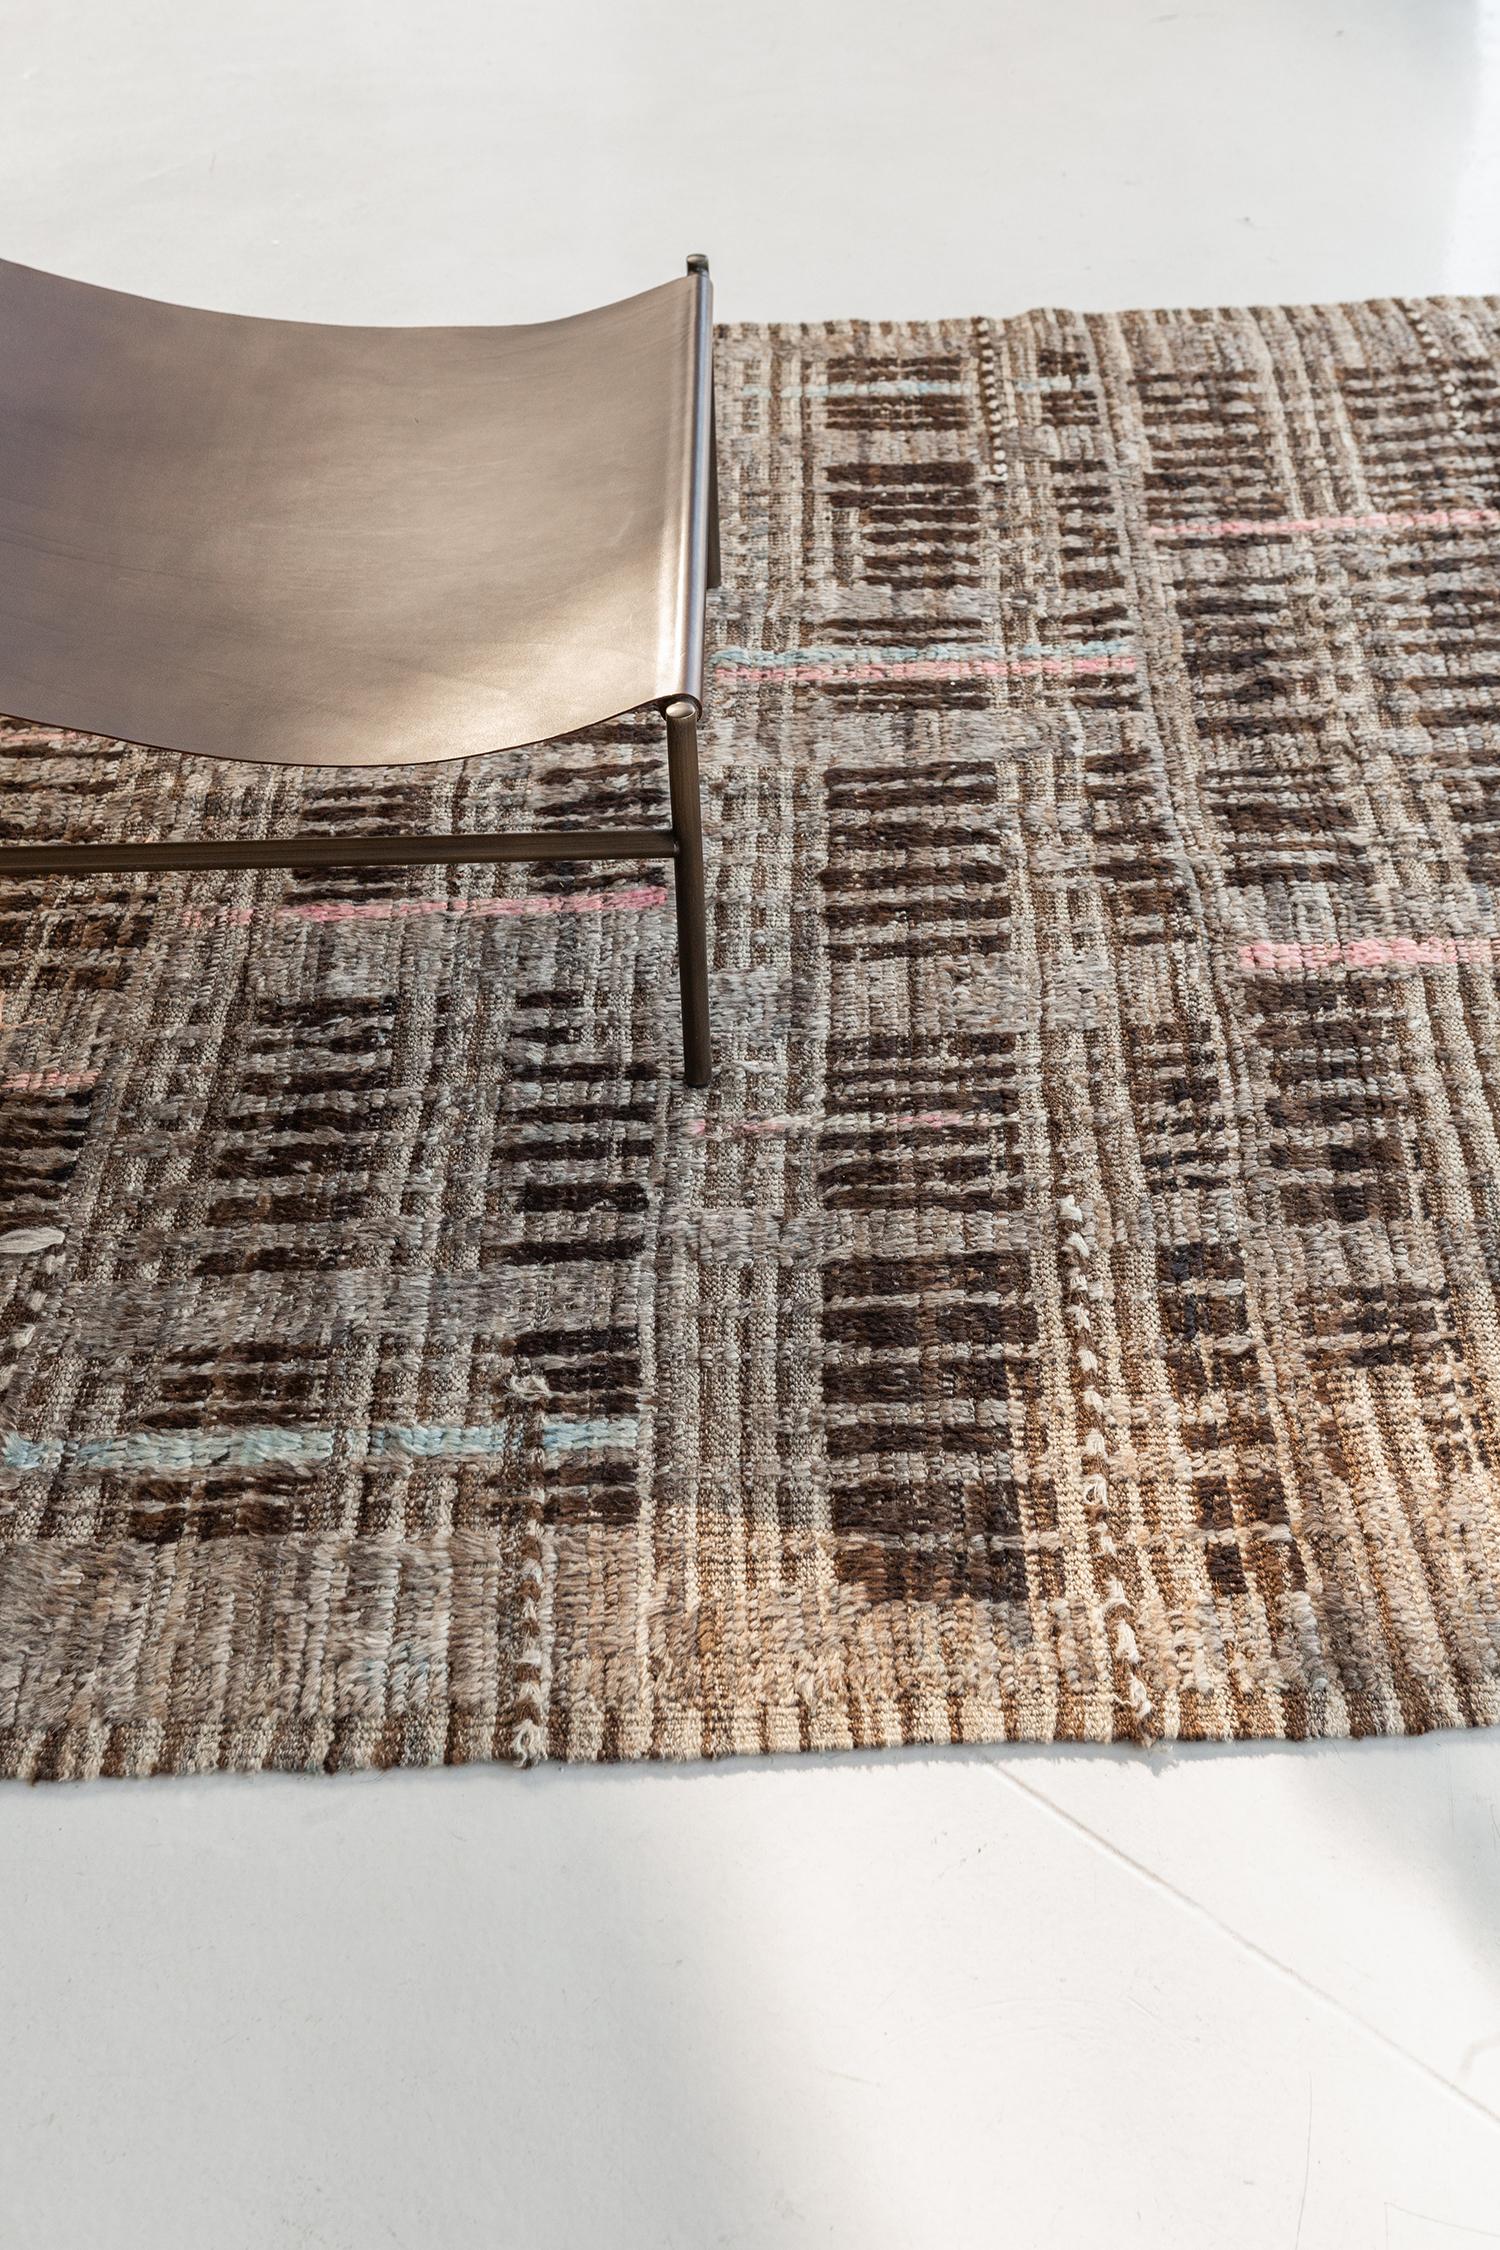 Bacatta uses linework and color to create definition and movement into handwoven wool. Line detailing in taupe and tan fascinatingly move across the rug. Detailed natural flat-weave runs around the border with tassels adding an exquisite decorative